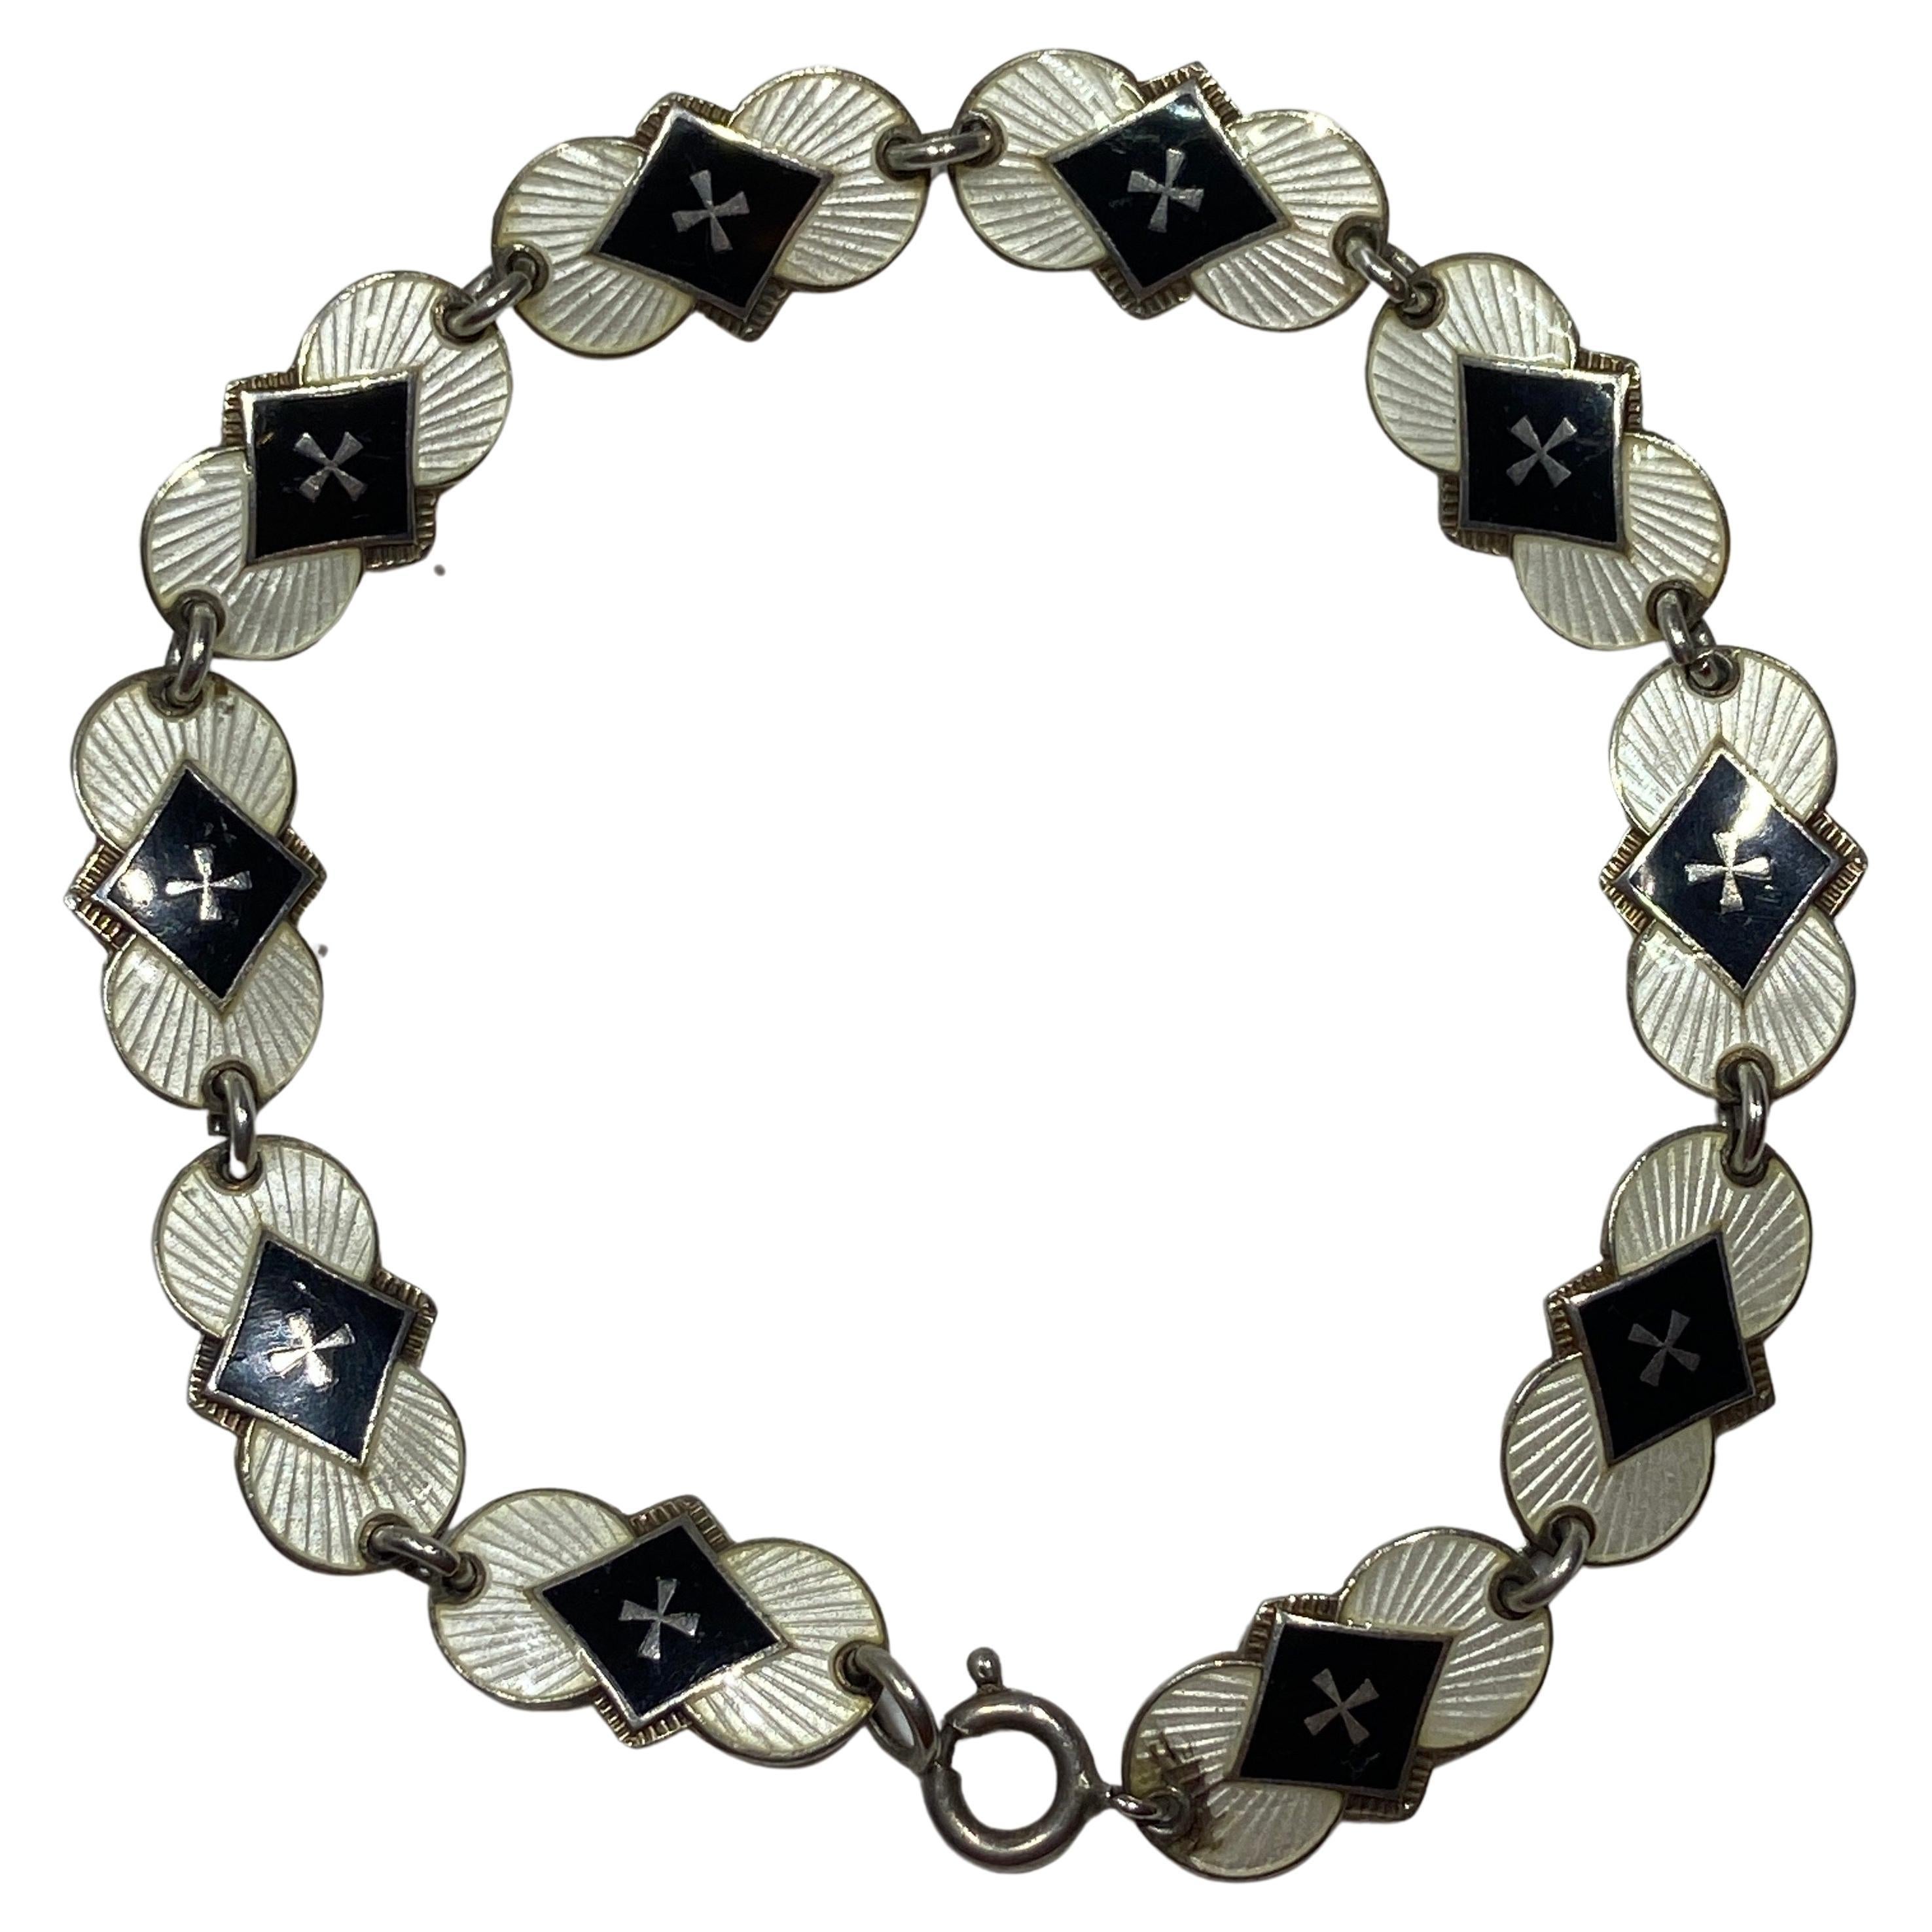 Delicately Detailed Sterling Silver with Black and Cream Enamel Overlay Bracelet